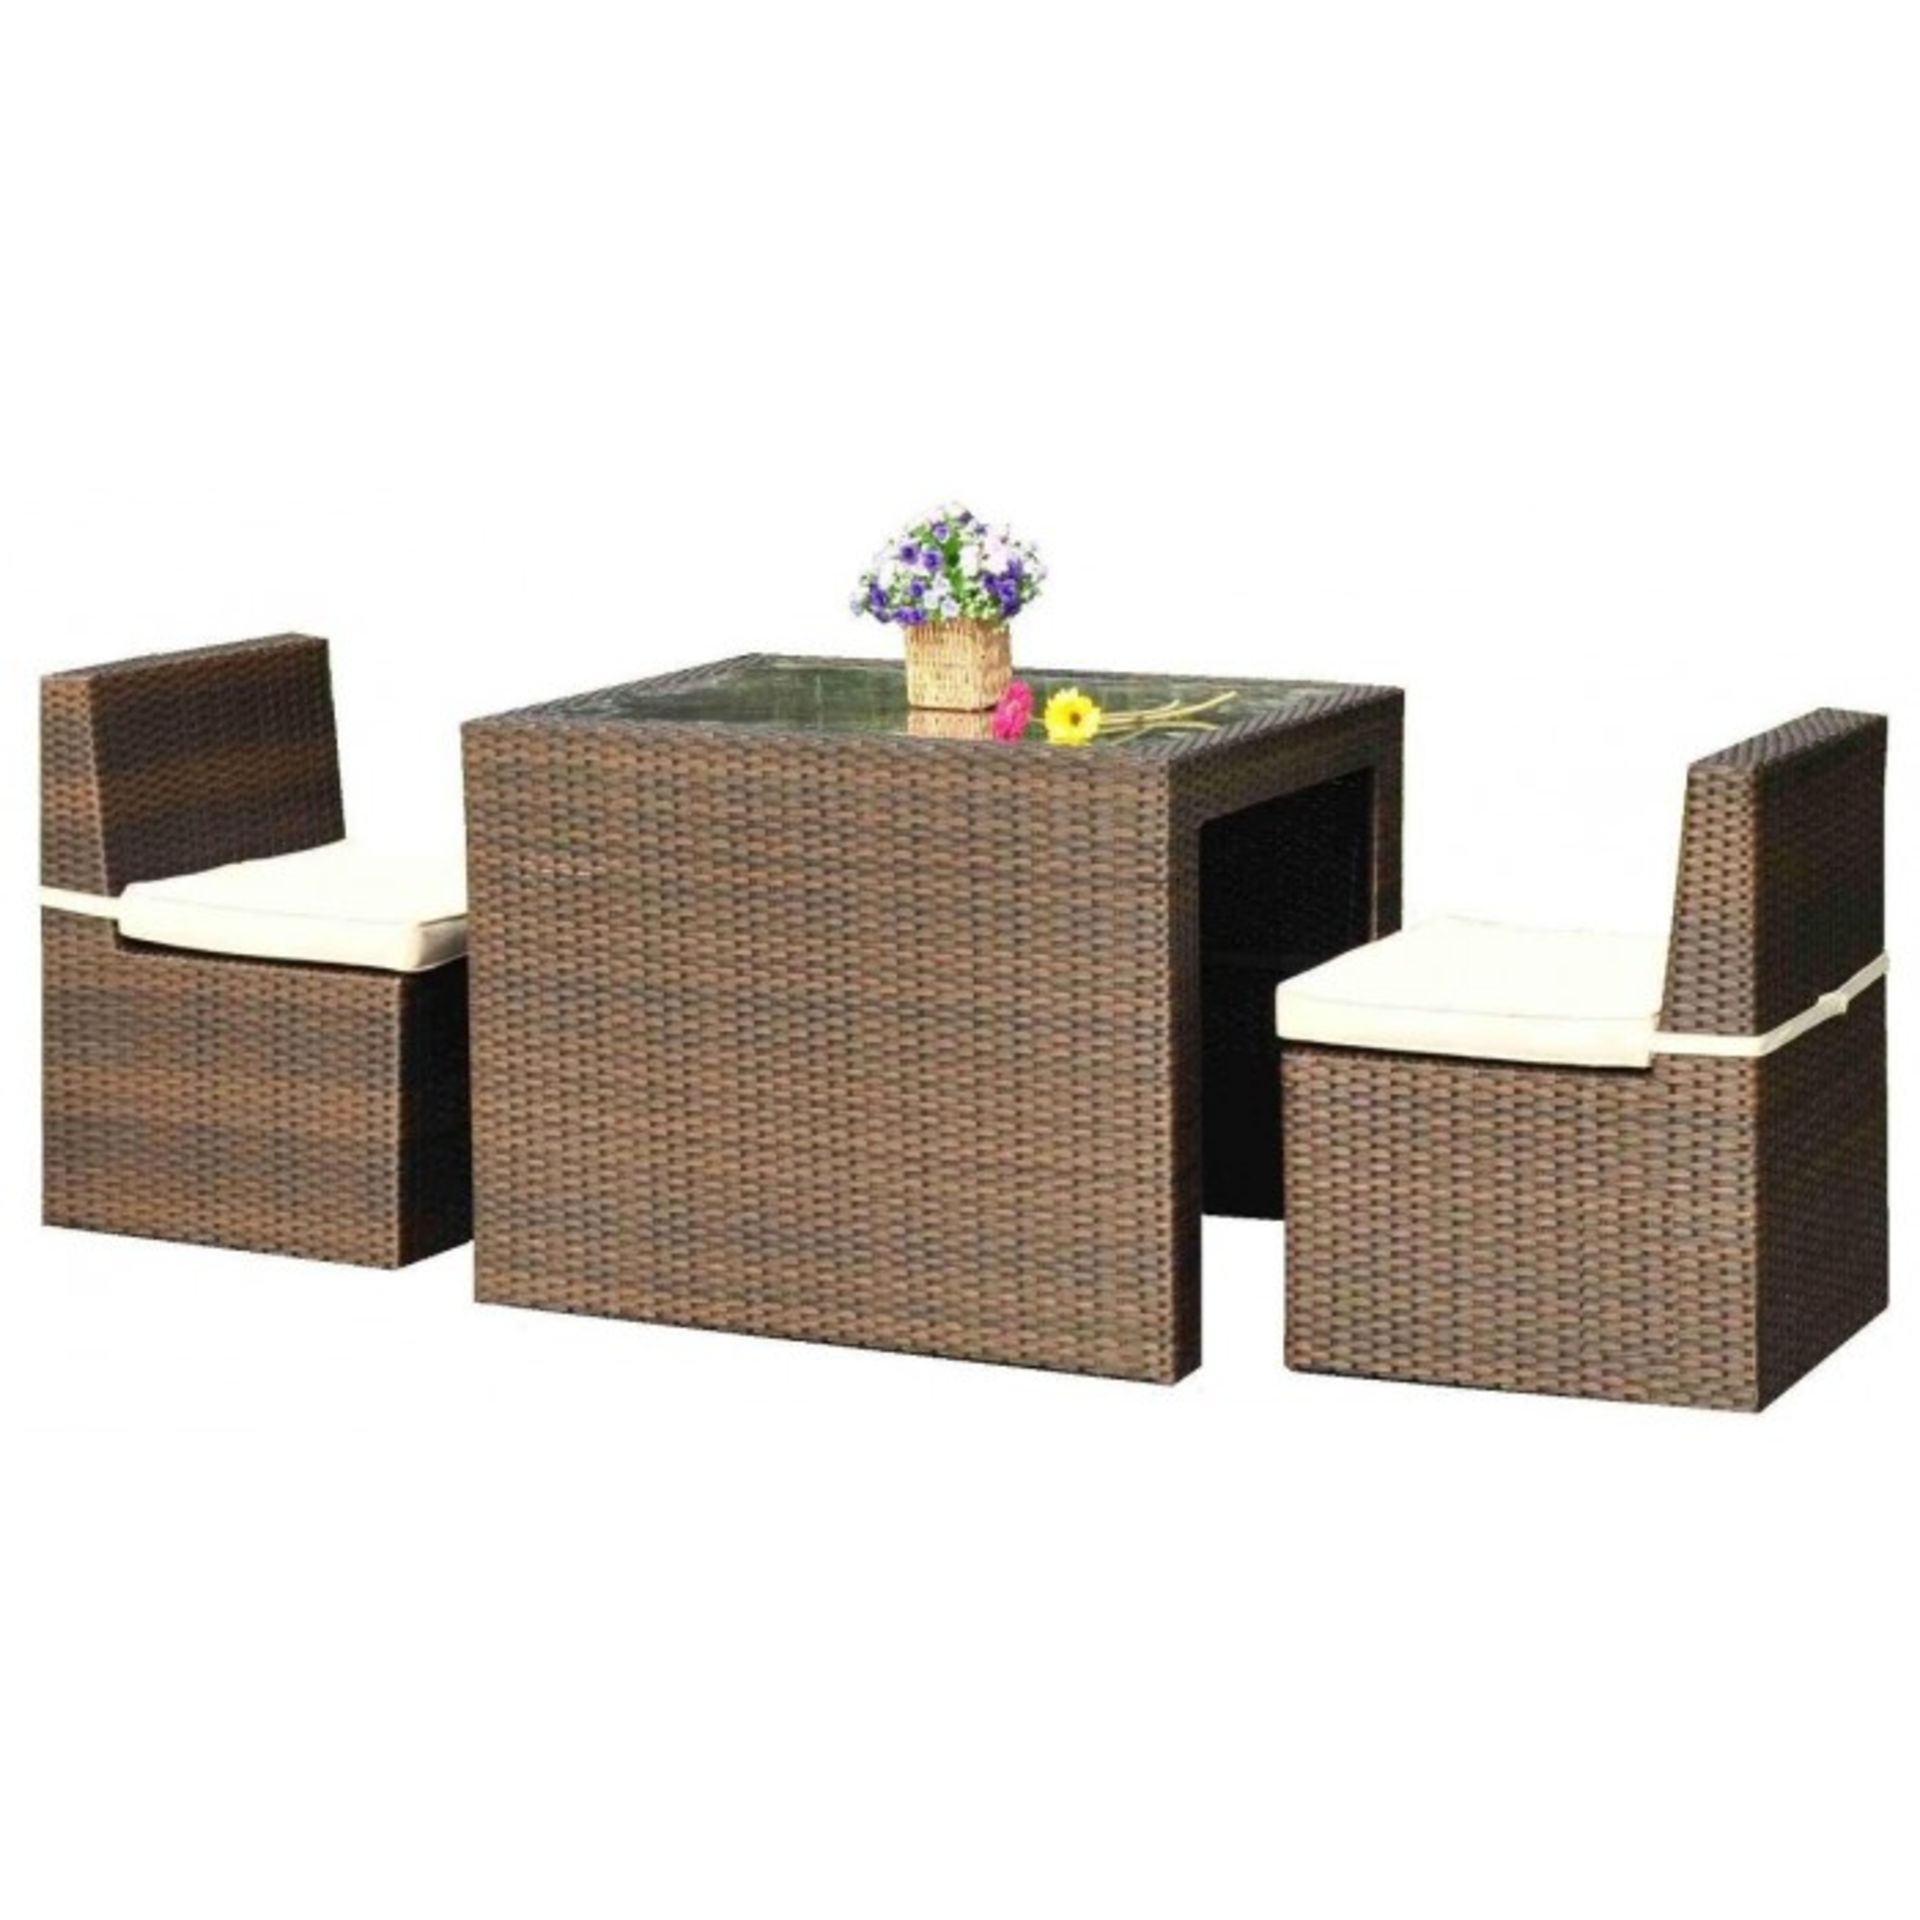 V Brand New Cannes Breakfast Set - Ideal For Smaller Garden Or Balcony - Comprises Of Glass Top